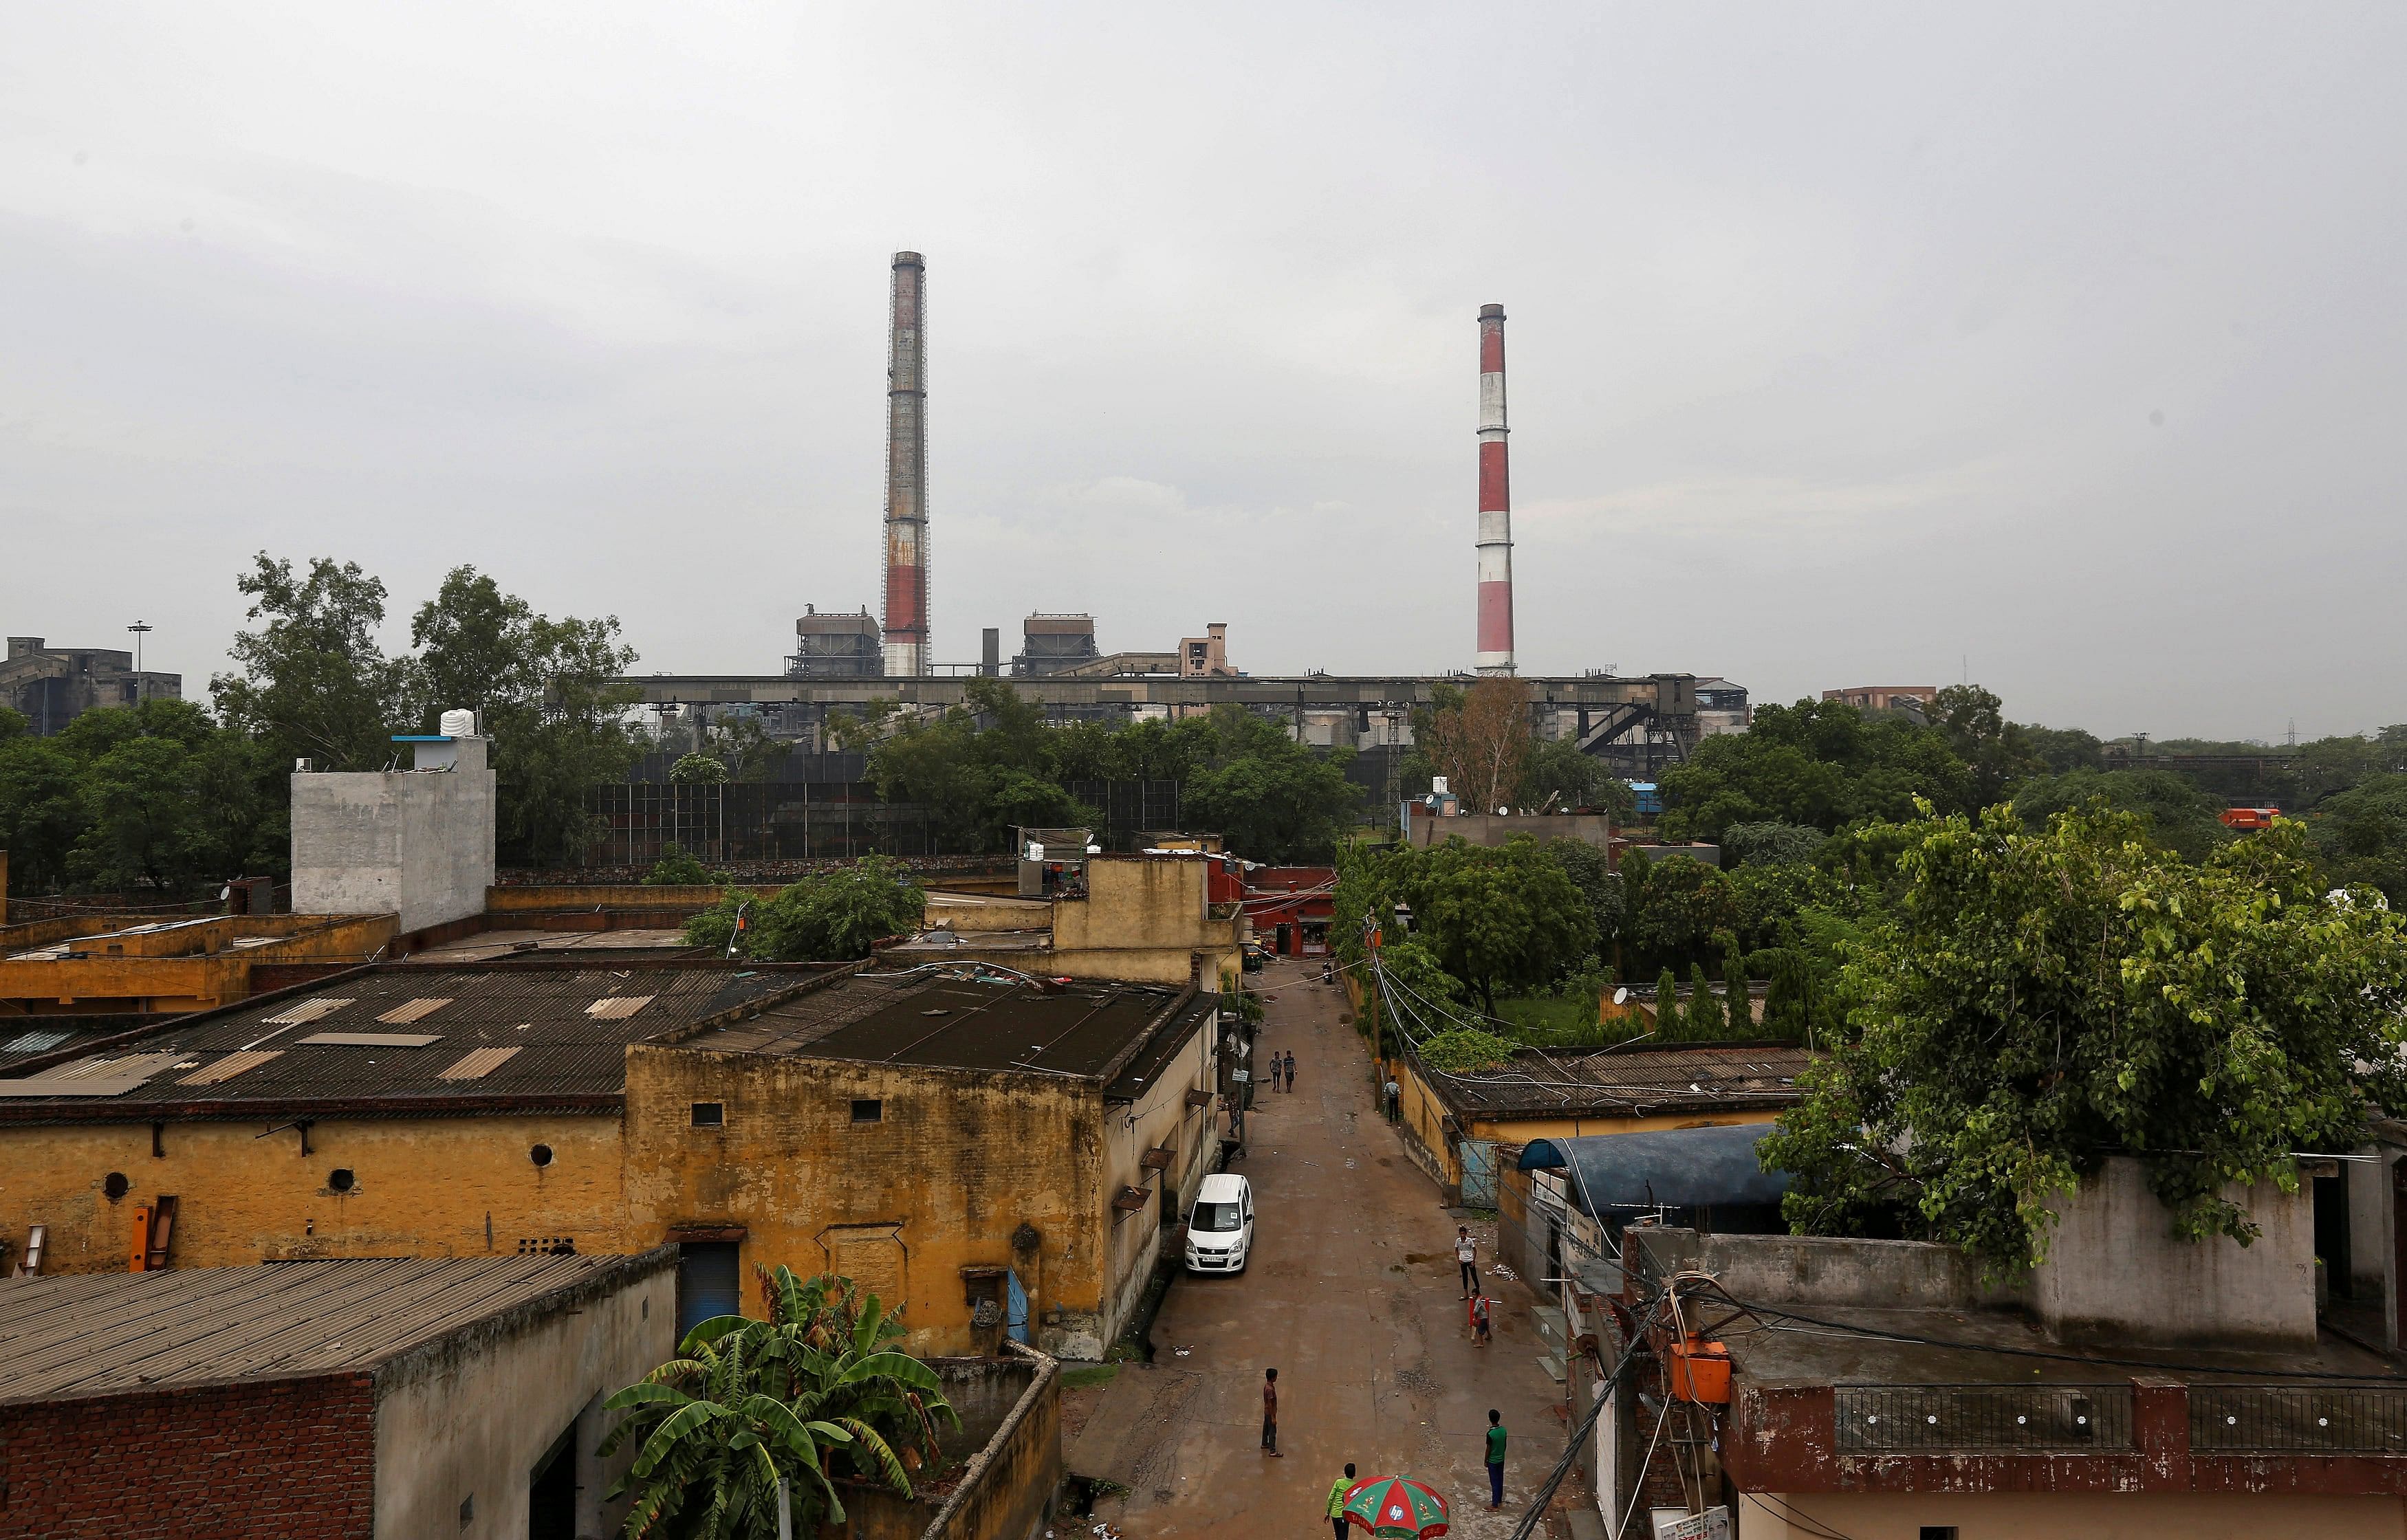 Chimneys of a coal-fired power plant are pictures in New Delhi, India, July 20, 2017. (Credit: Reuters Photo)